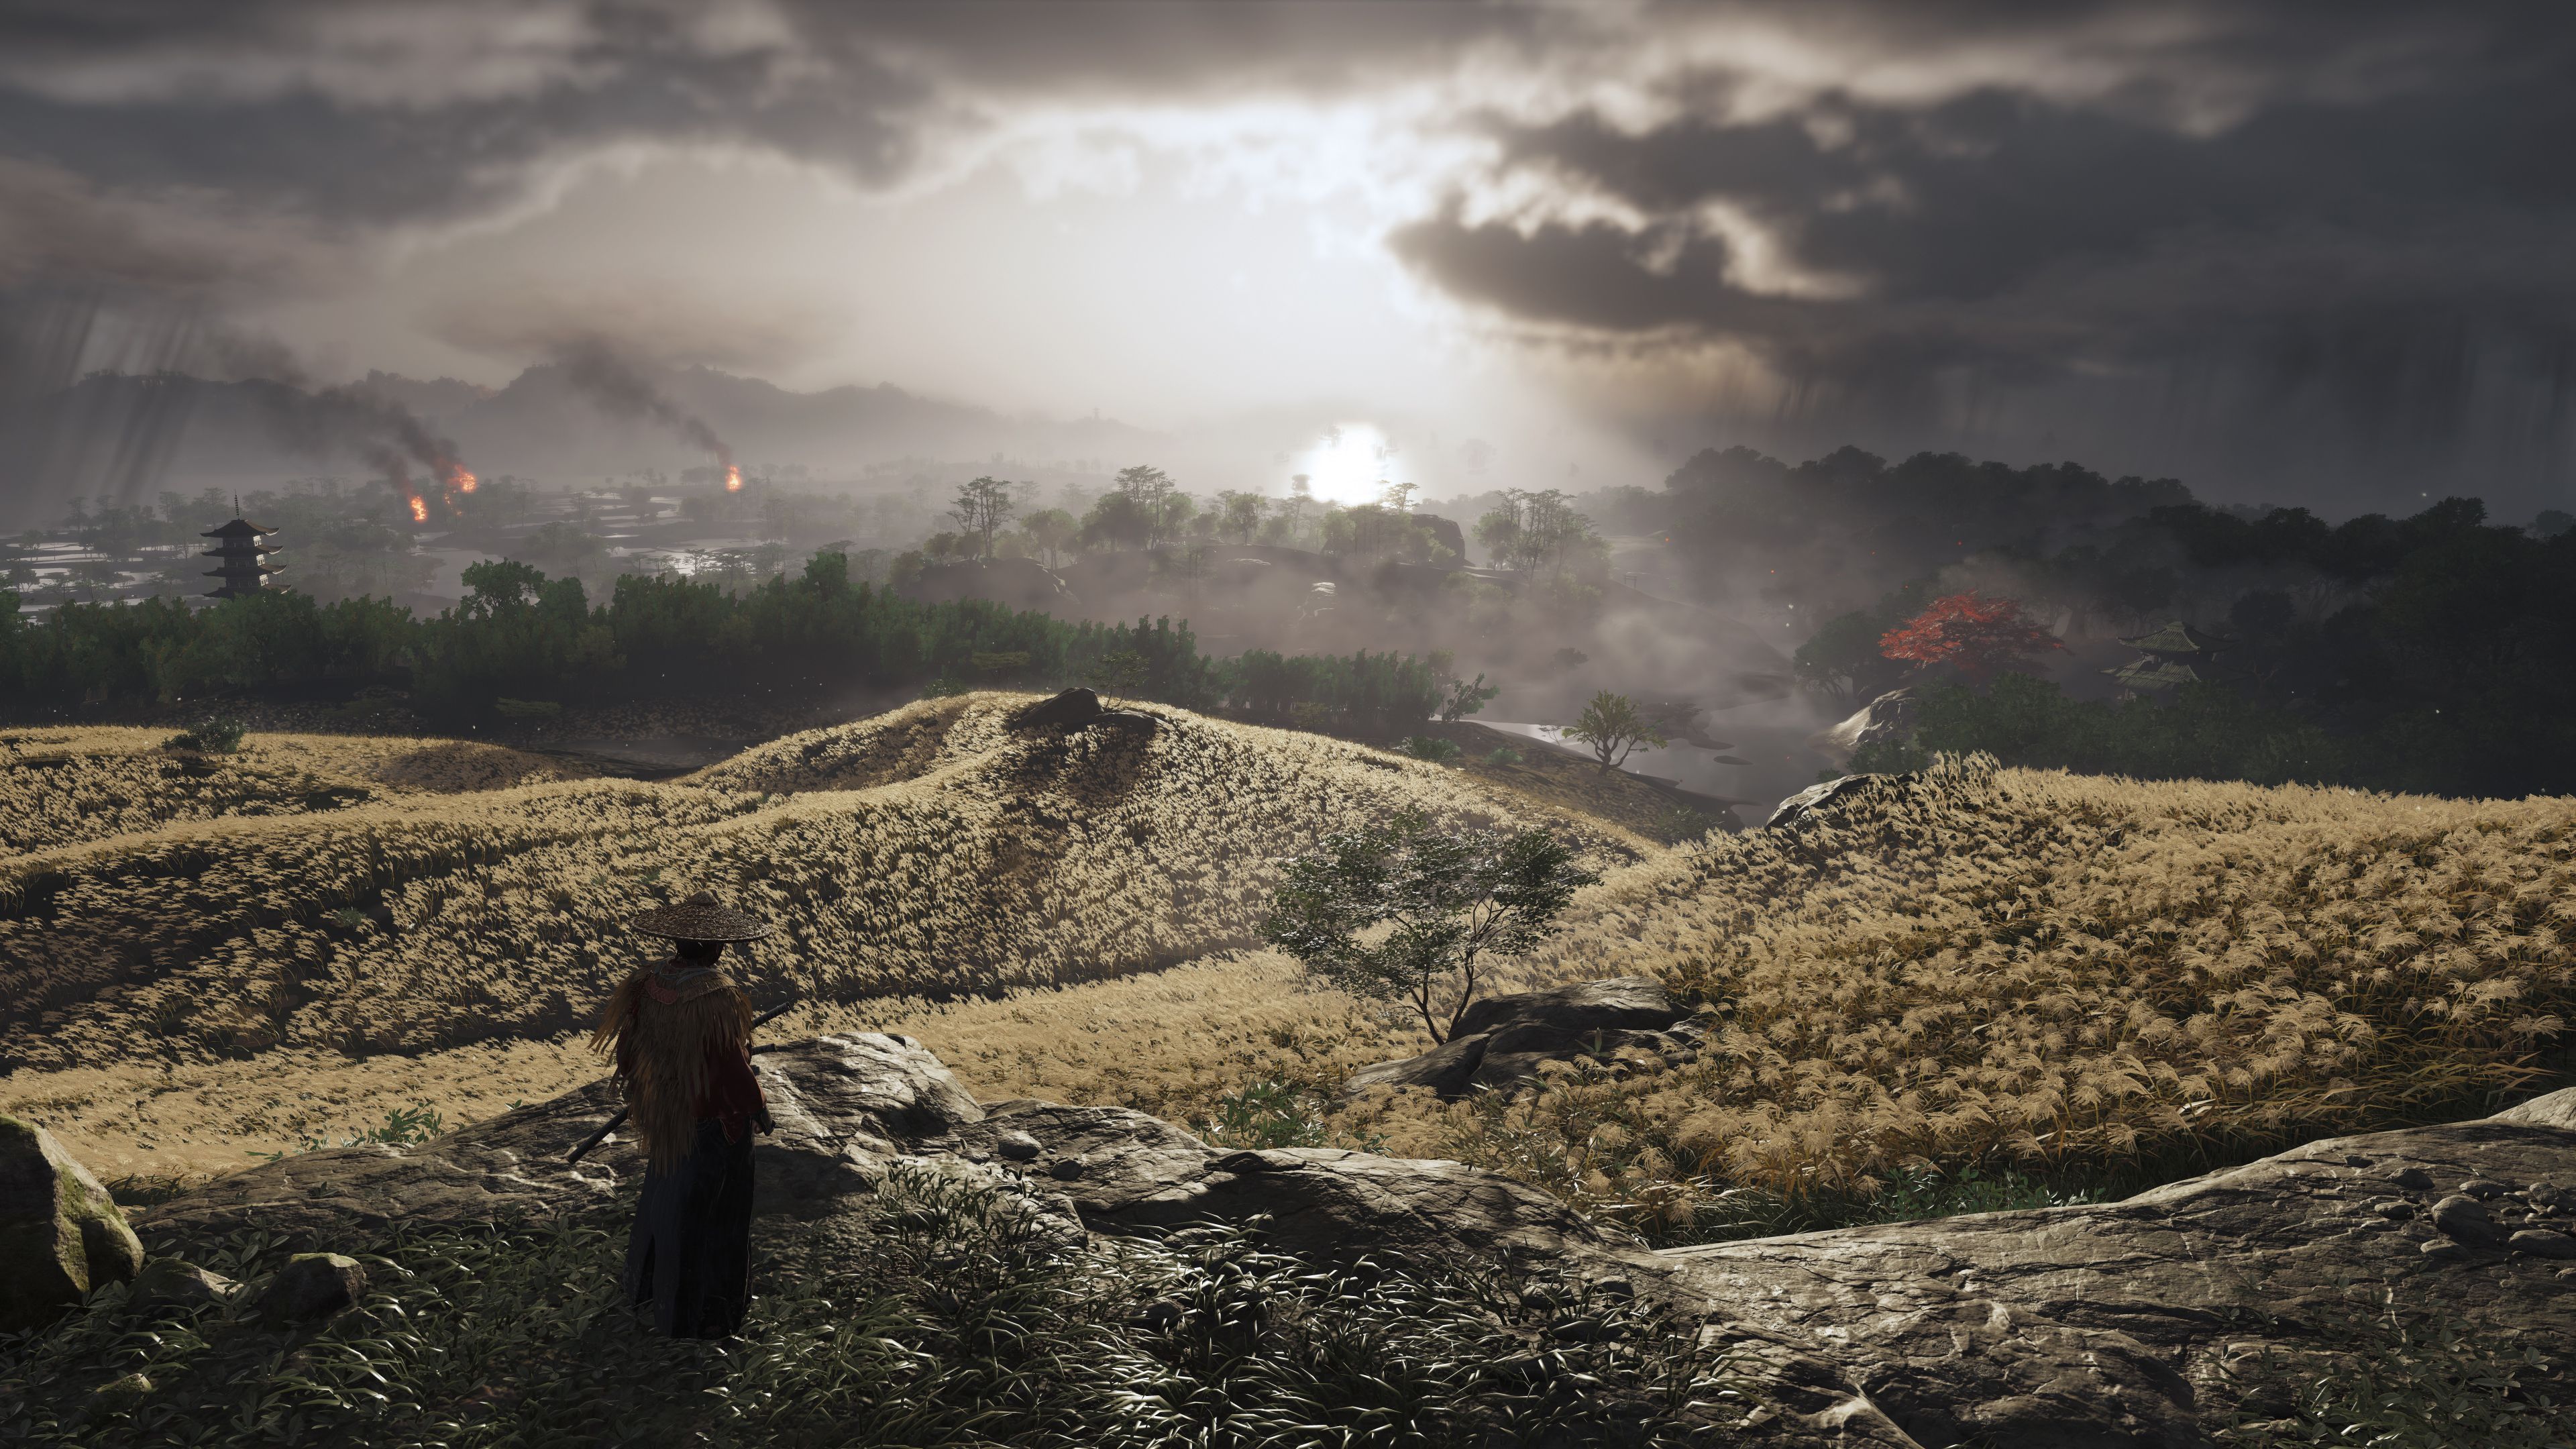 Ghost of Tsushima HD Wallpaper and Background